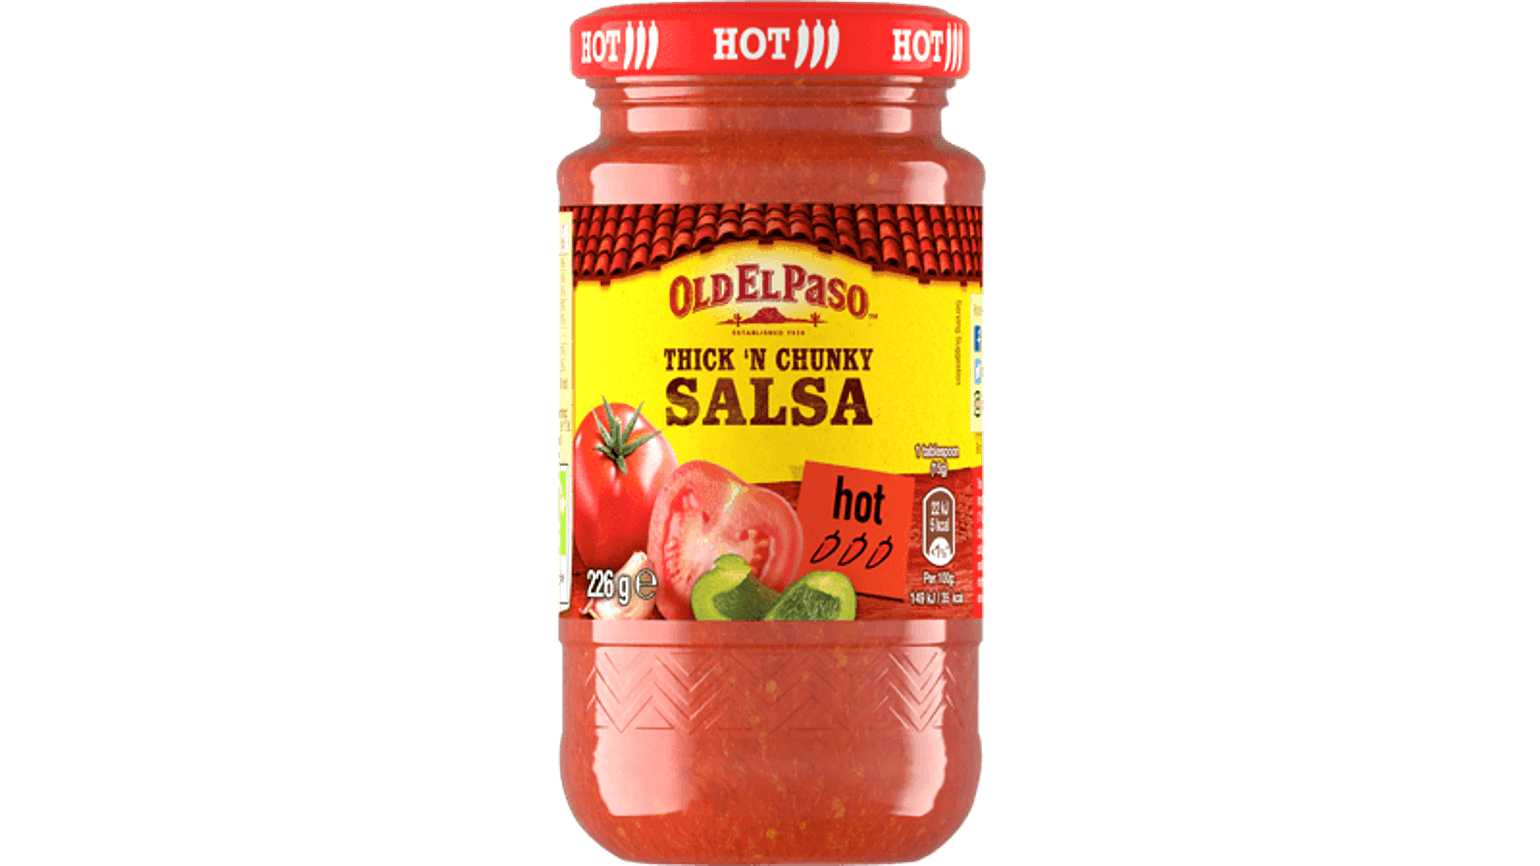 glass jar of Old El Paso's hot thick and chunky salsa (226g)